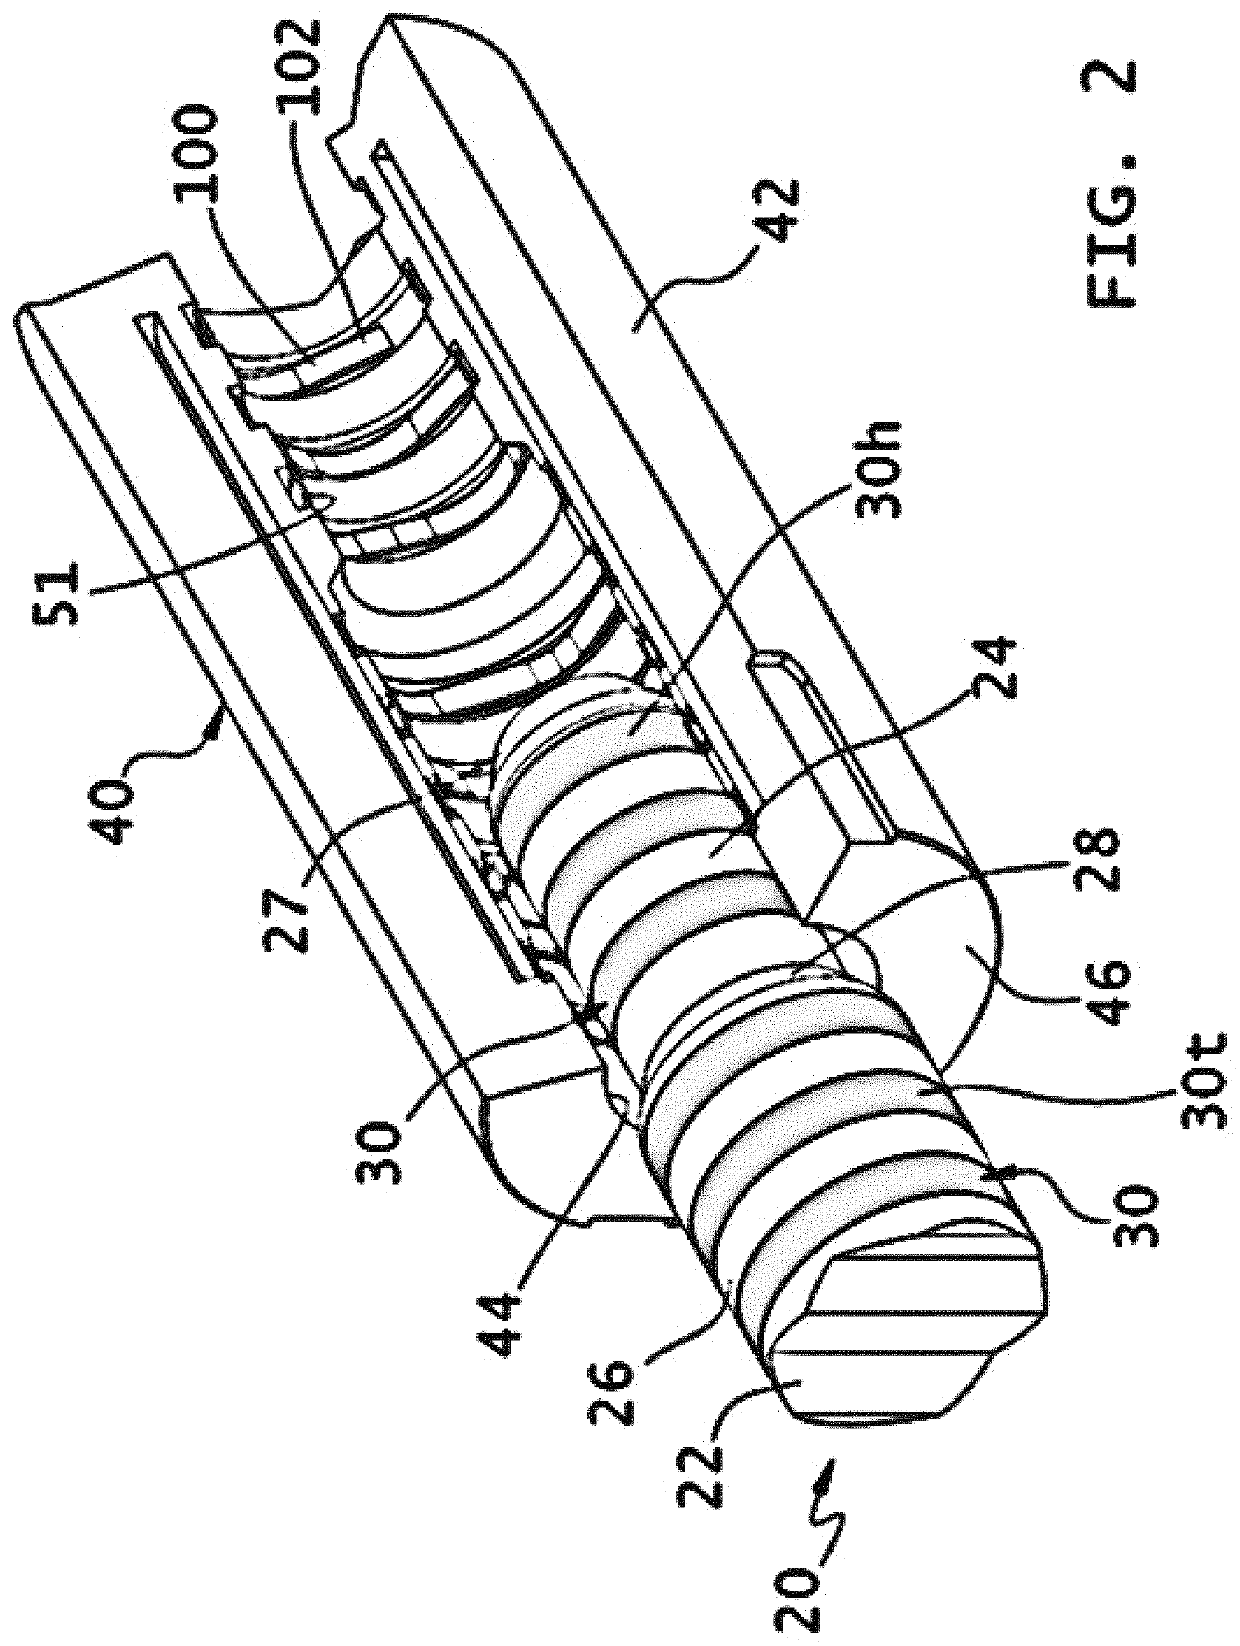 Multi-conductor rotary connector